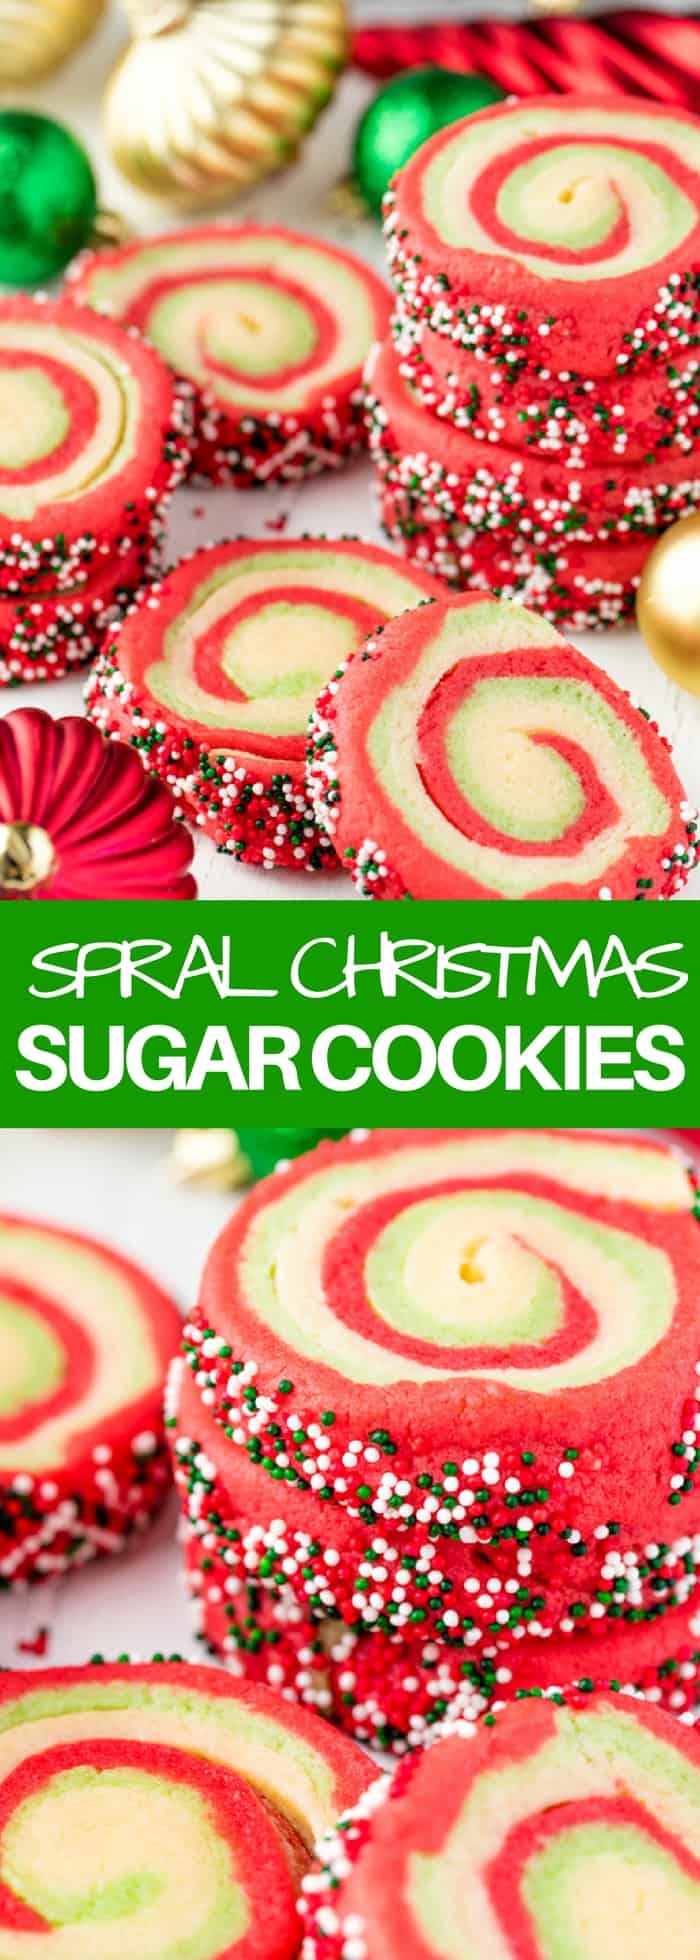 These Spiral Christmas Sugar Cookies are soft and chewy and full of festive colors!